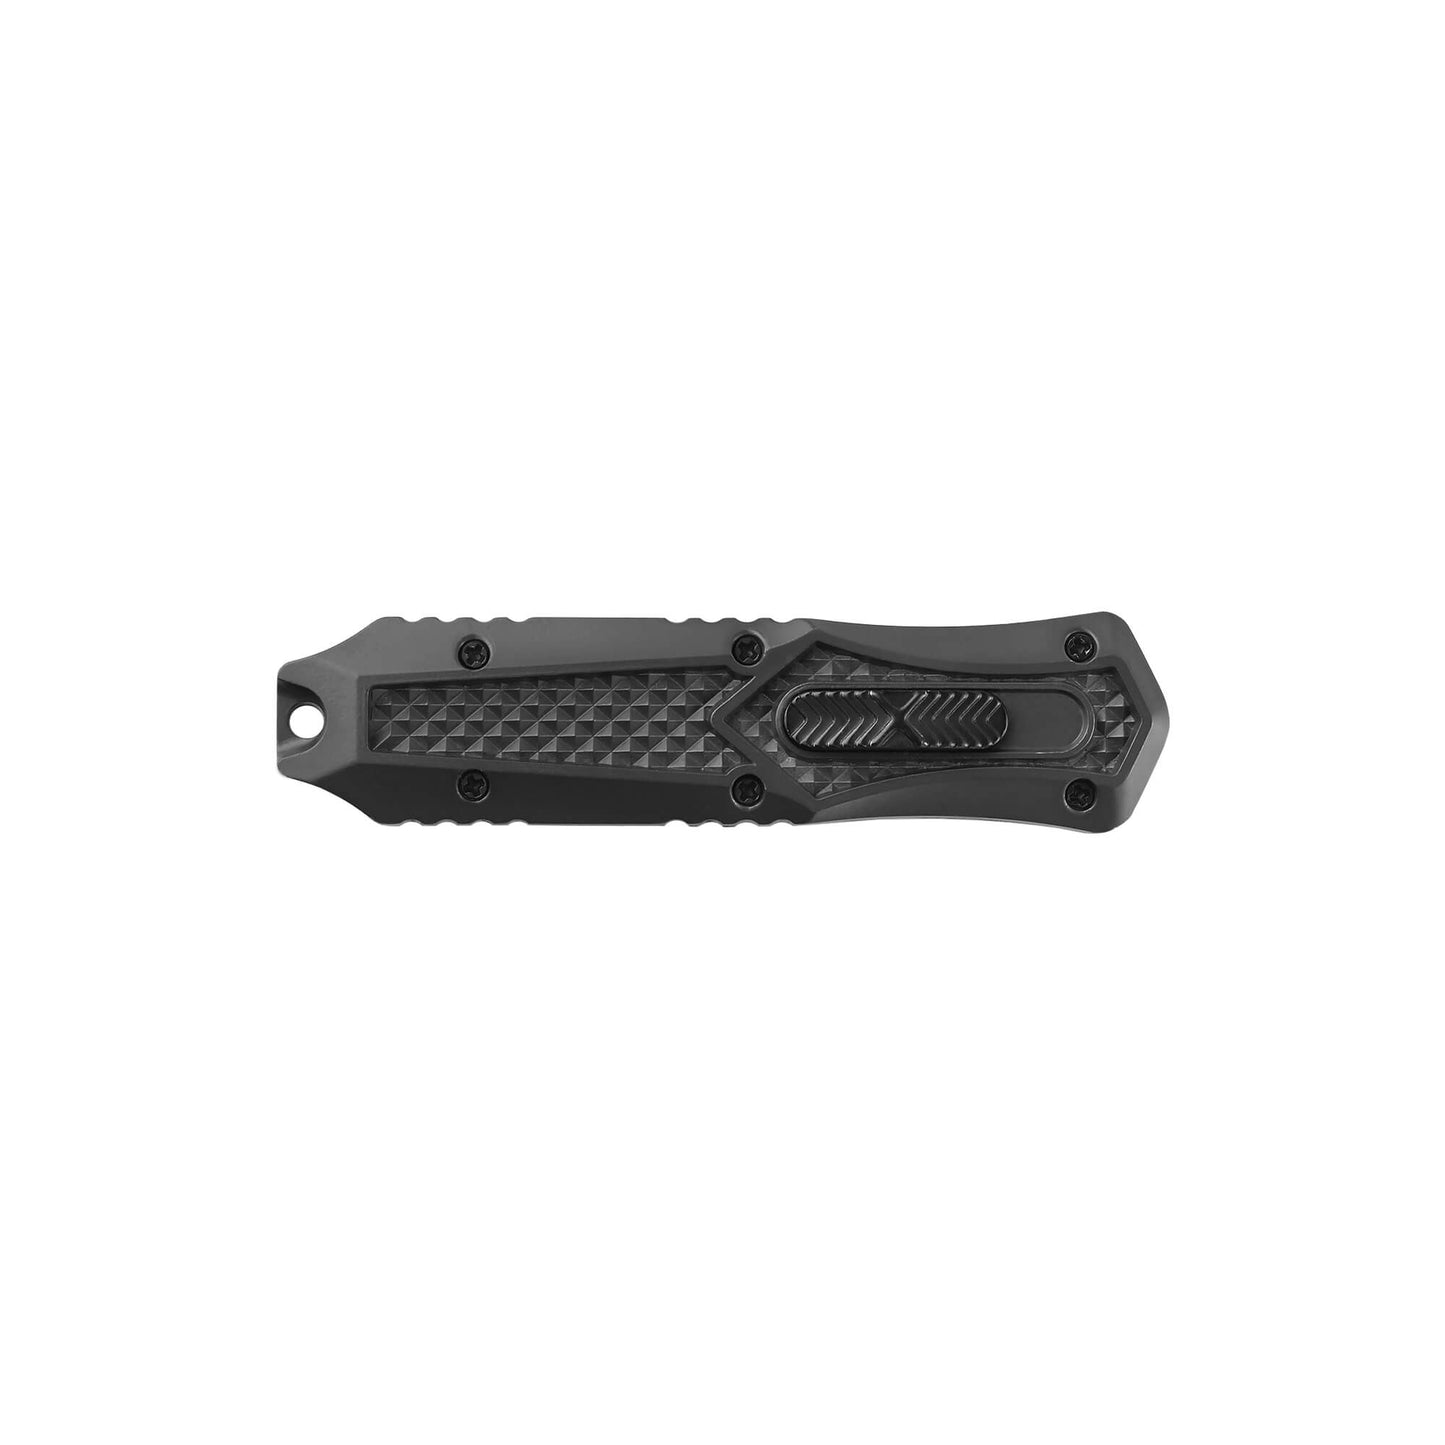 Black Automatic OTF knife Relik from Mavik Gear with spear point blade, Zinc alloy handle, button lock and lanyard hole.